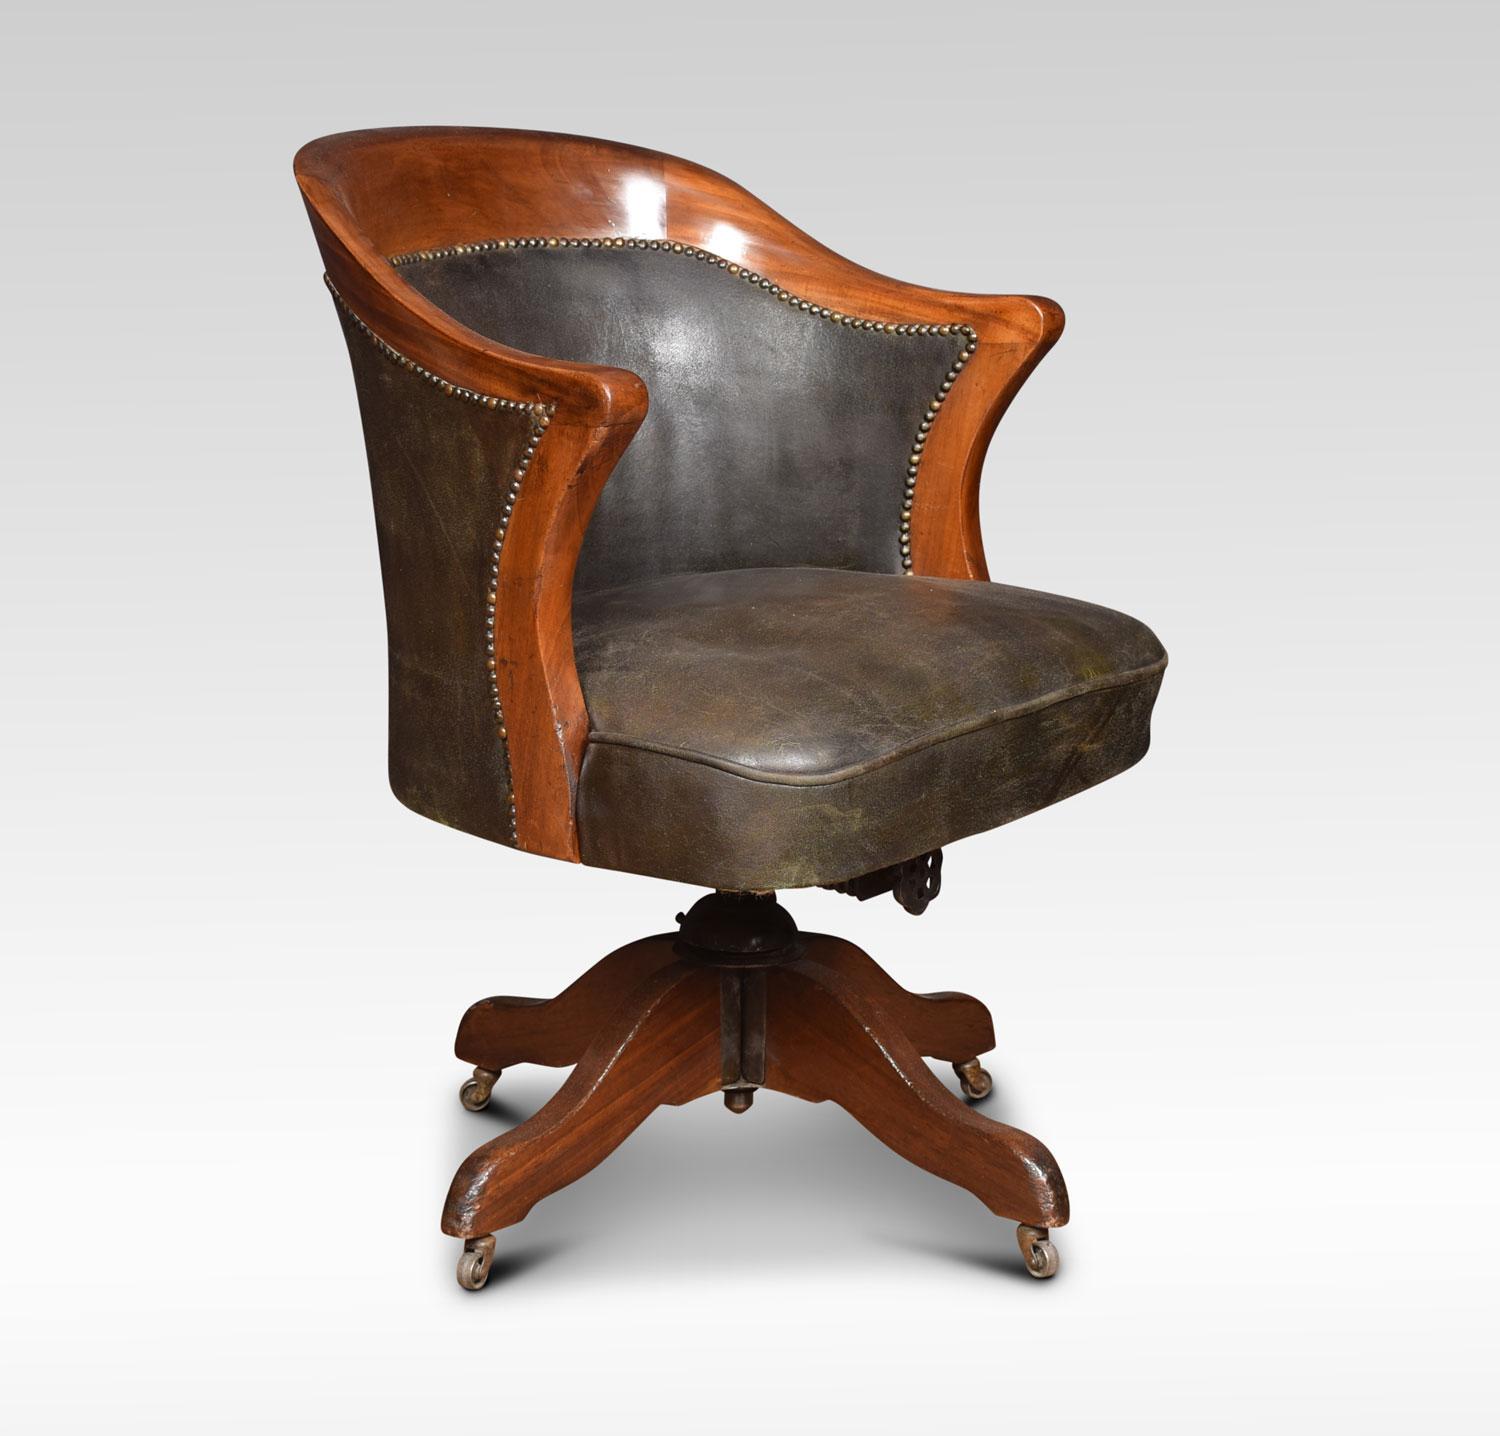 Mahogany framed adjustable swivel office chair the raised back above upholstered green leather seat and arms the chair retaining its original leather. Raised up on four splayed legs terminating in original castors
Dimensions:
Height 34 inches